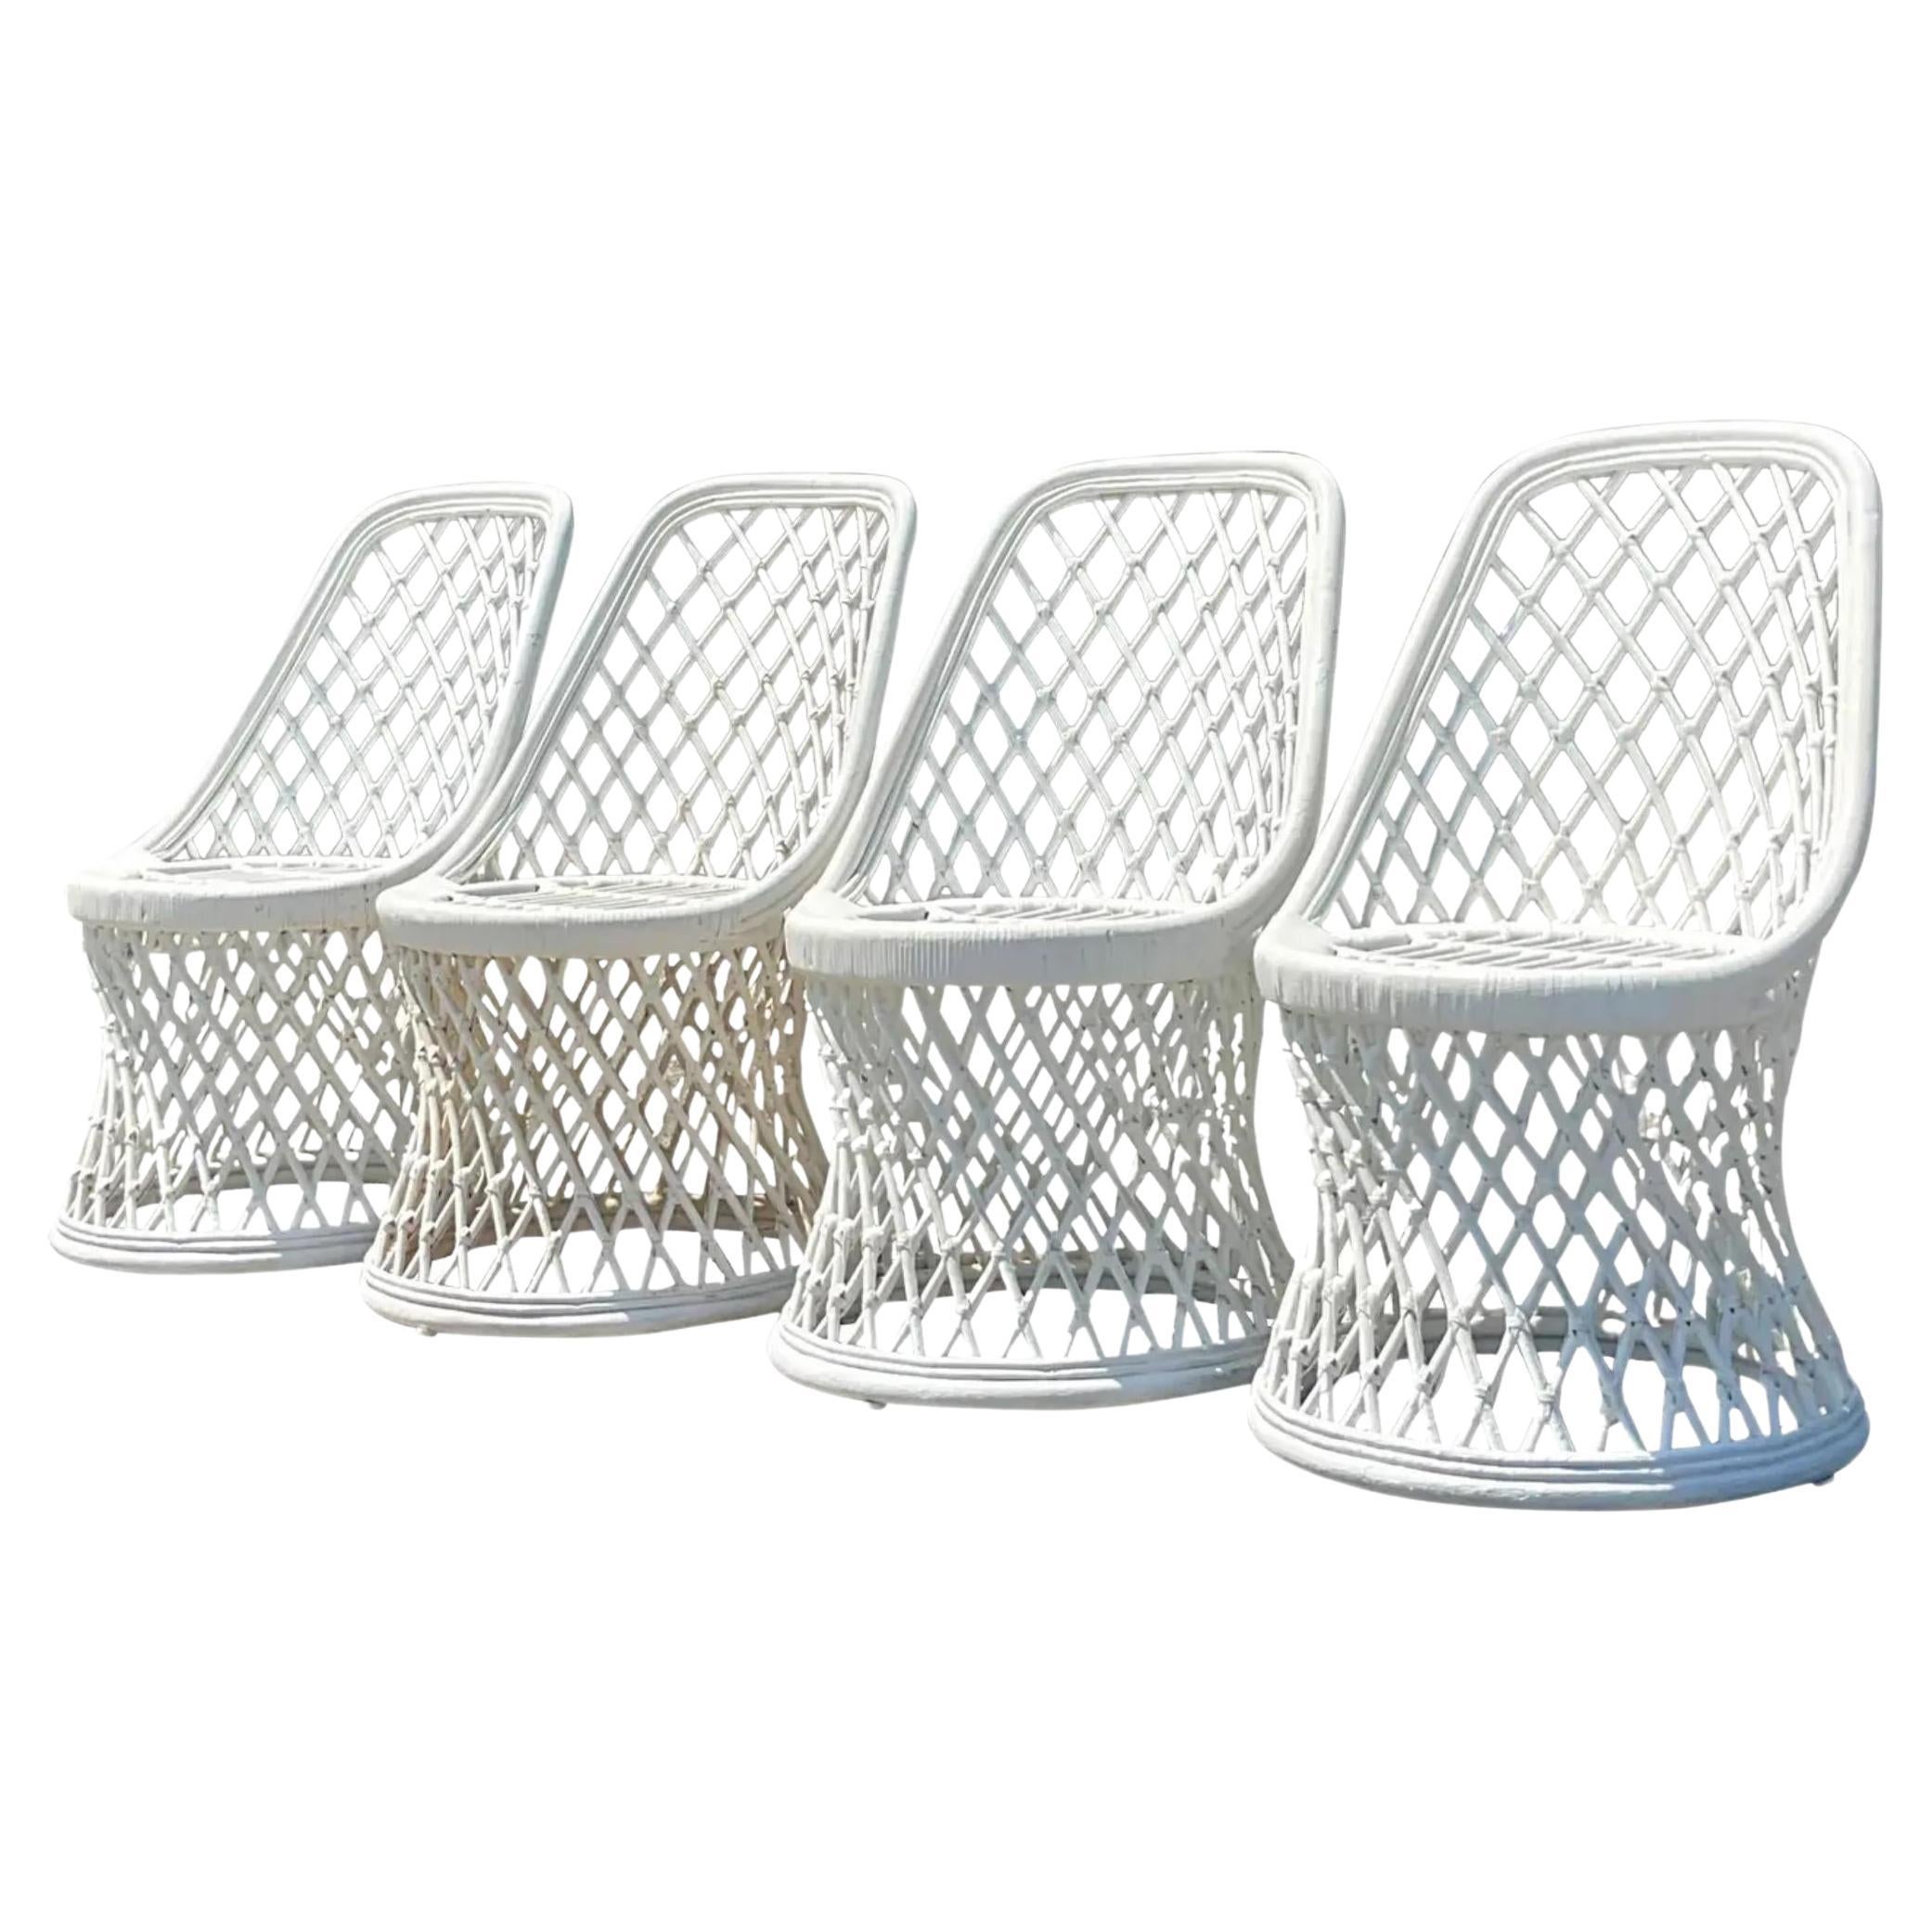 Vintage Coastal Painted Rattan Dining Chairs - Set of Four